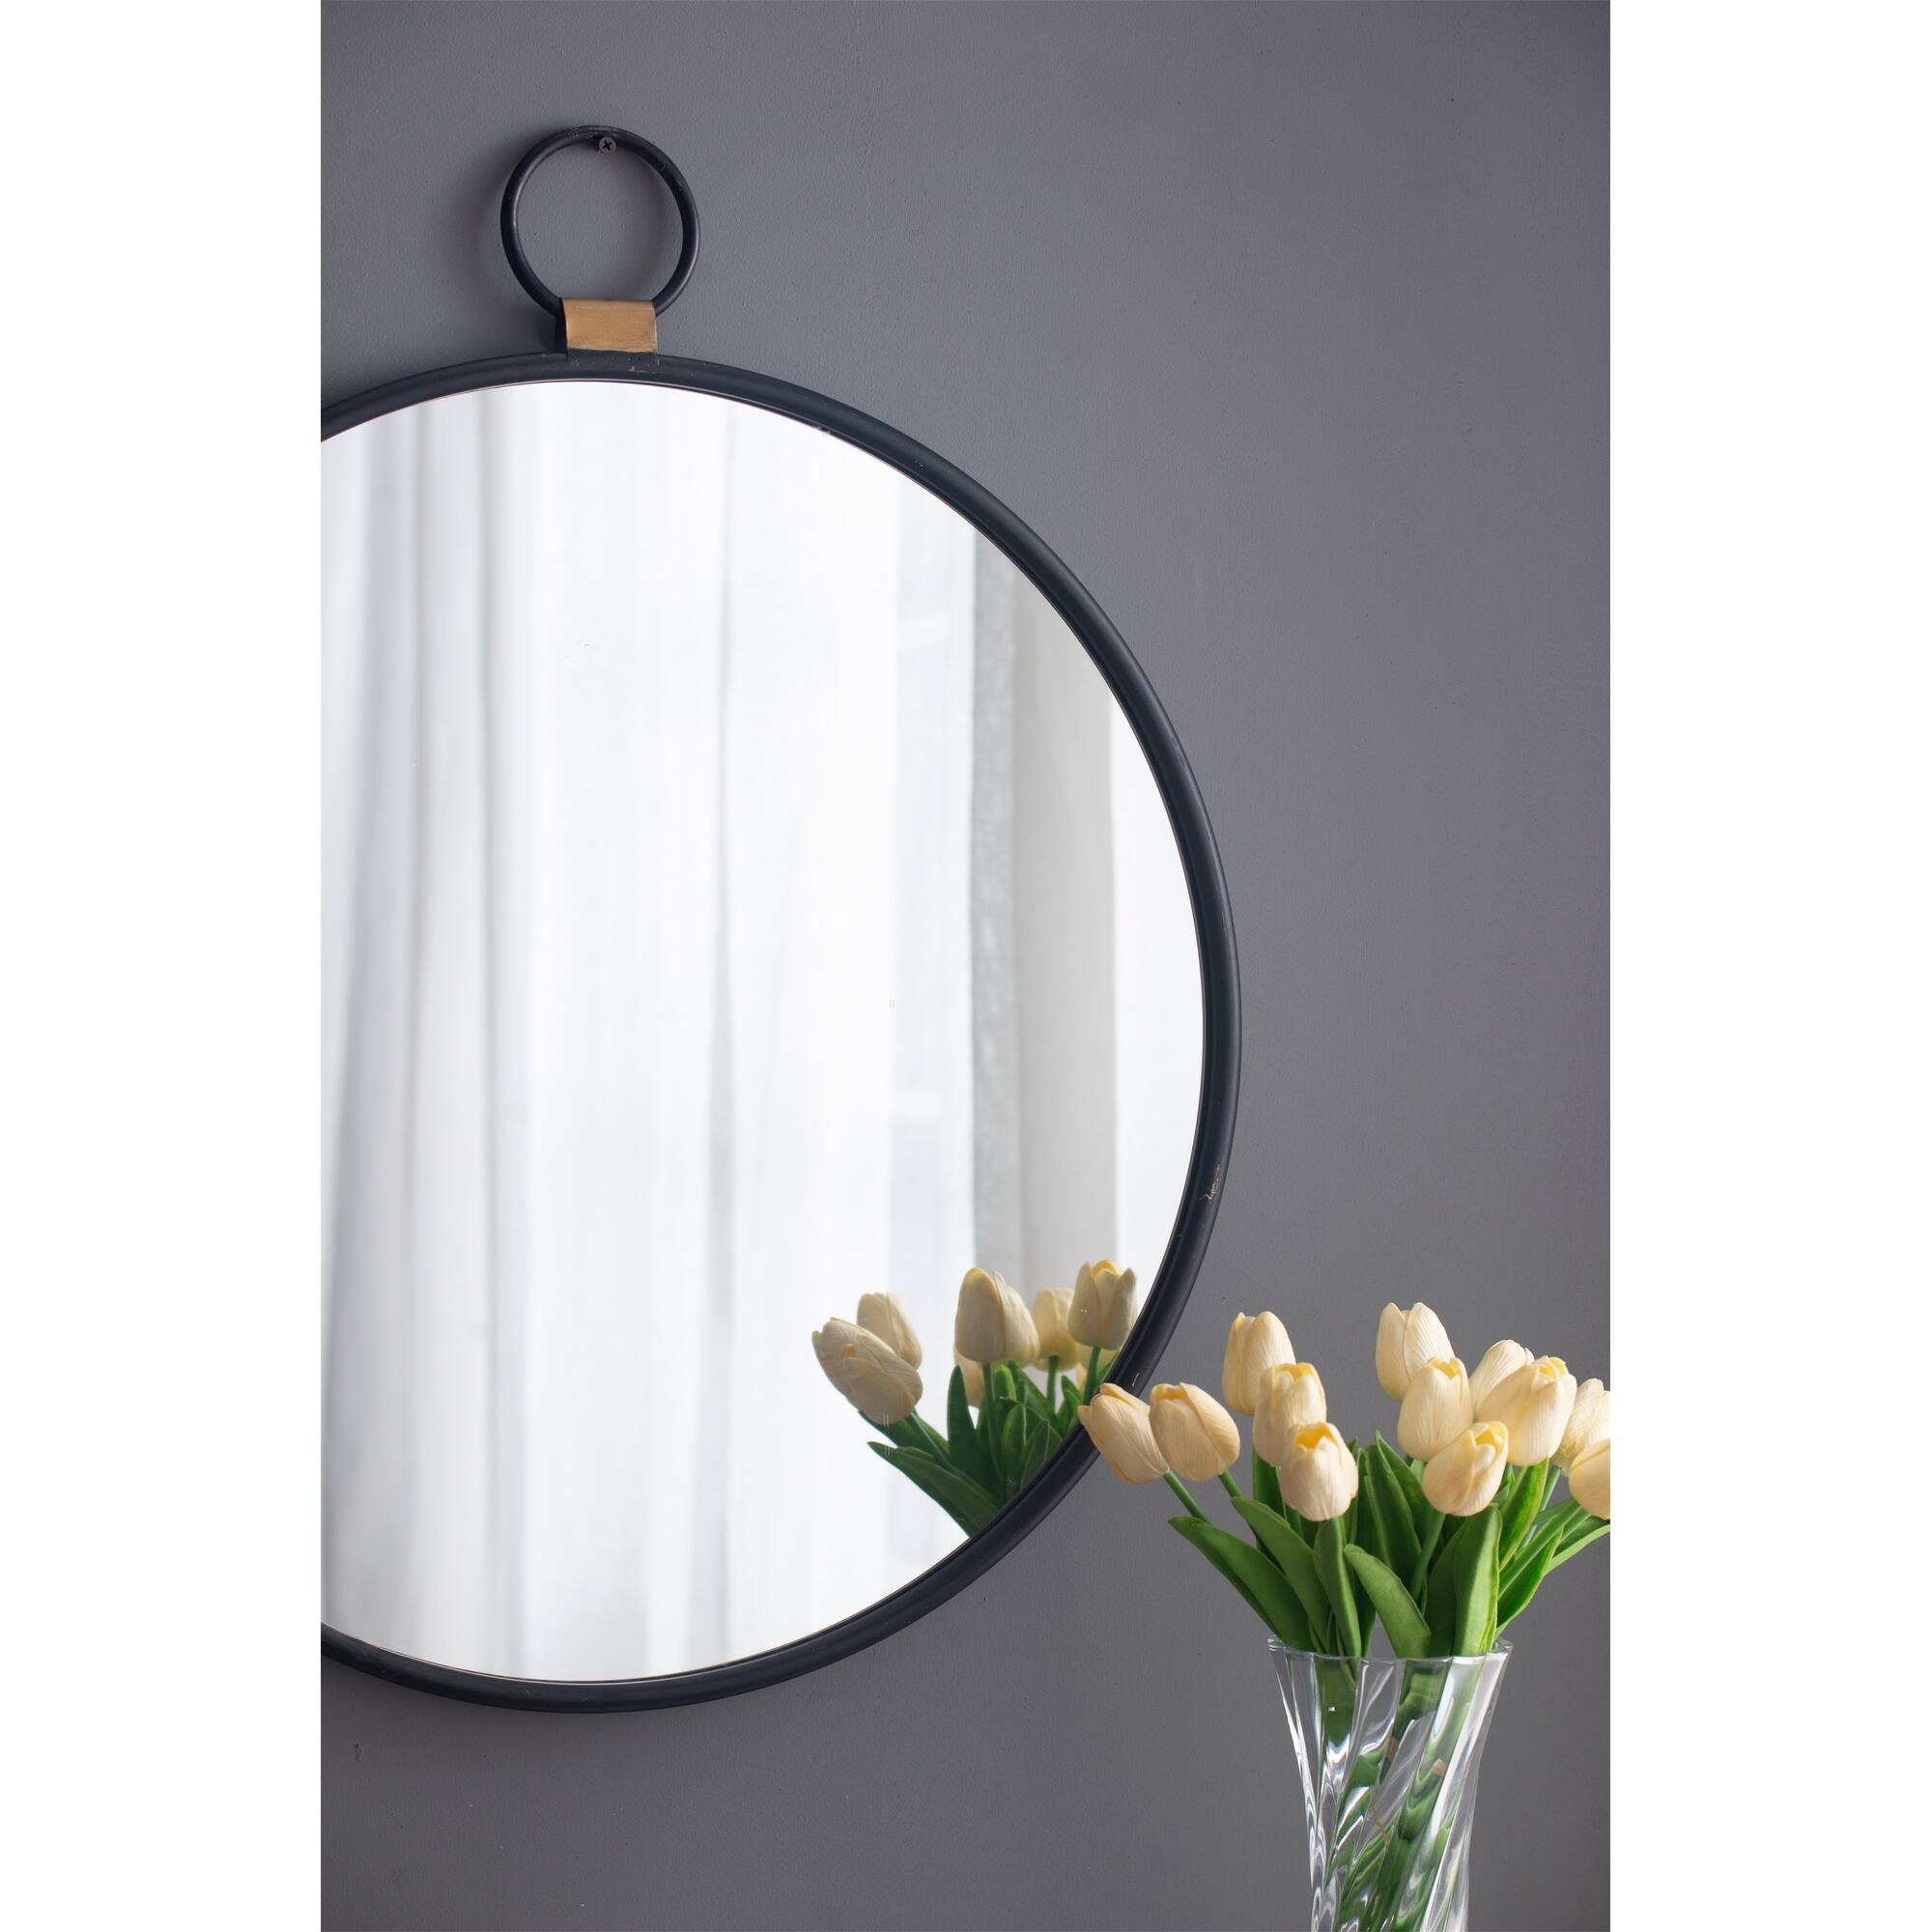 24" x 27" Wall Mirror with Black Frame